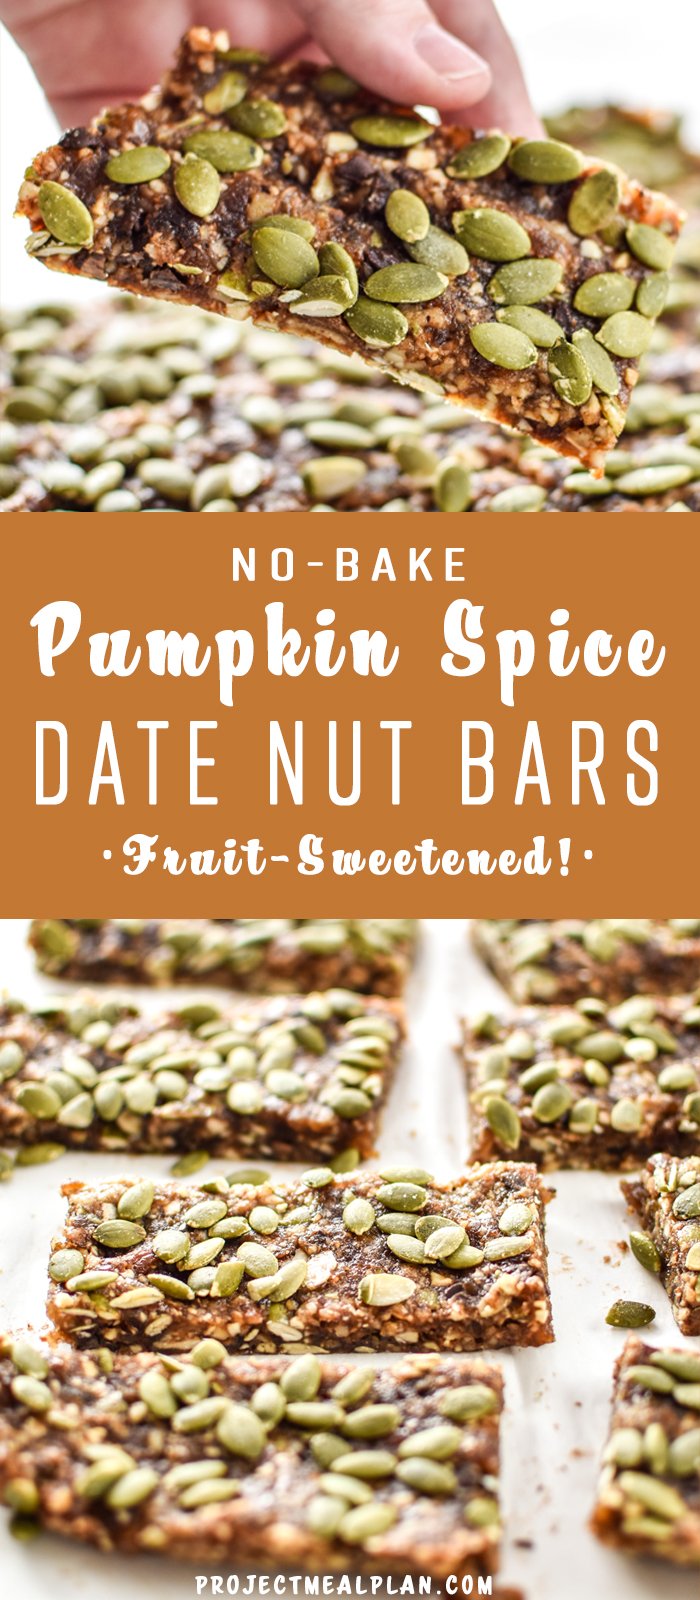 No-Bake Pumpkin Spice Date Nut Bars - Naturally sweetened with dates and full of pumpkin seeds! Homemade bars with that pumpkin spice life! - ProjectMealPlan.com